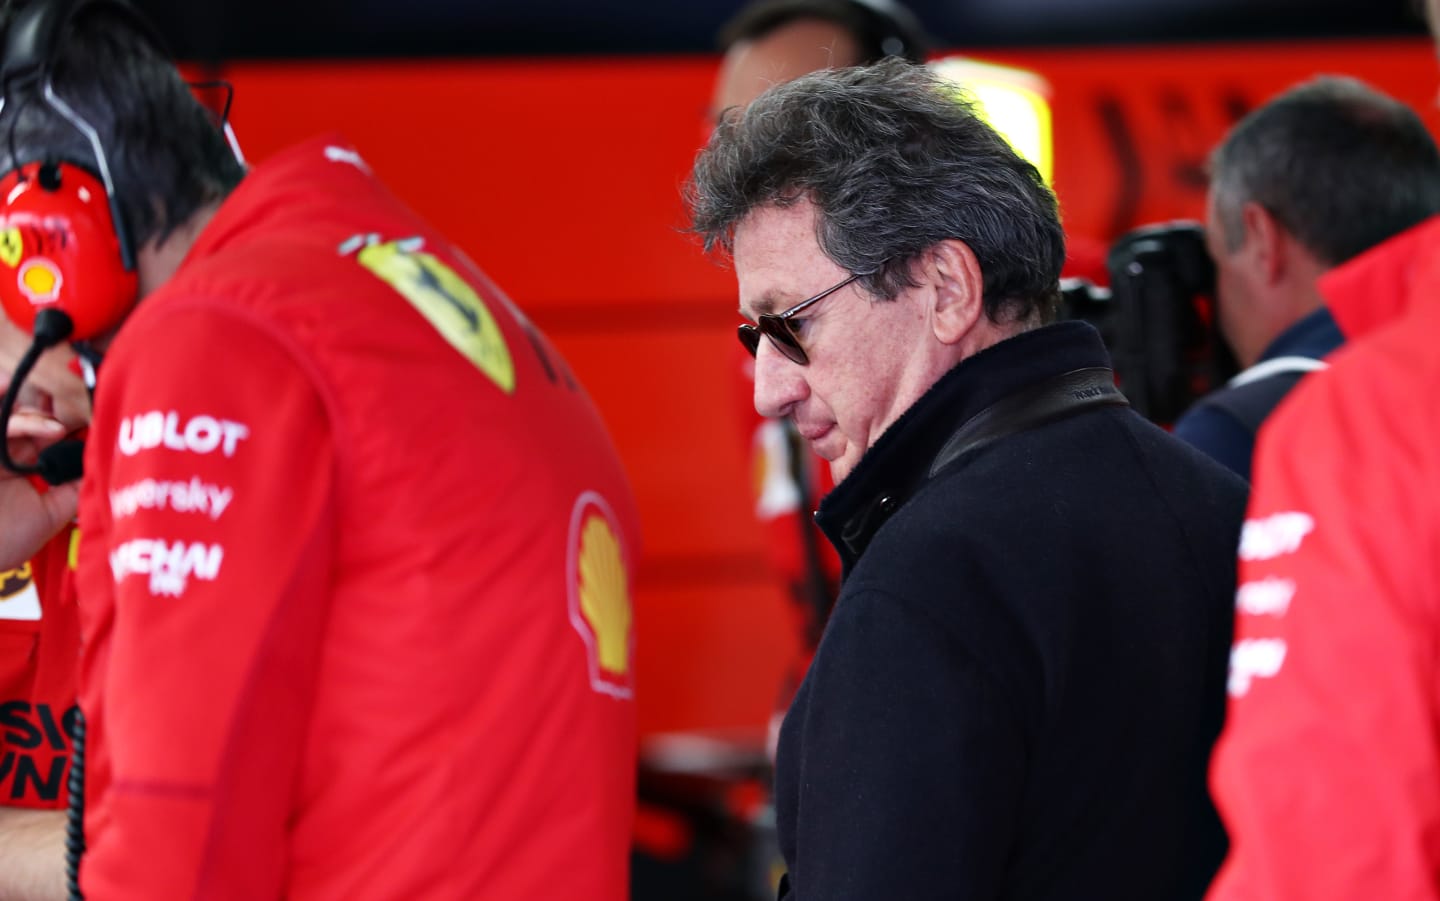 BARCELONA, SPAIN - FEBRUARY 21: Ferrari CEO Louis C. Camilleri looks on in the garage during day